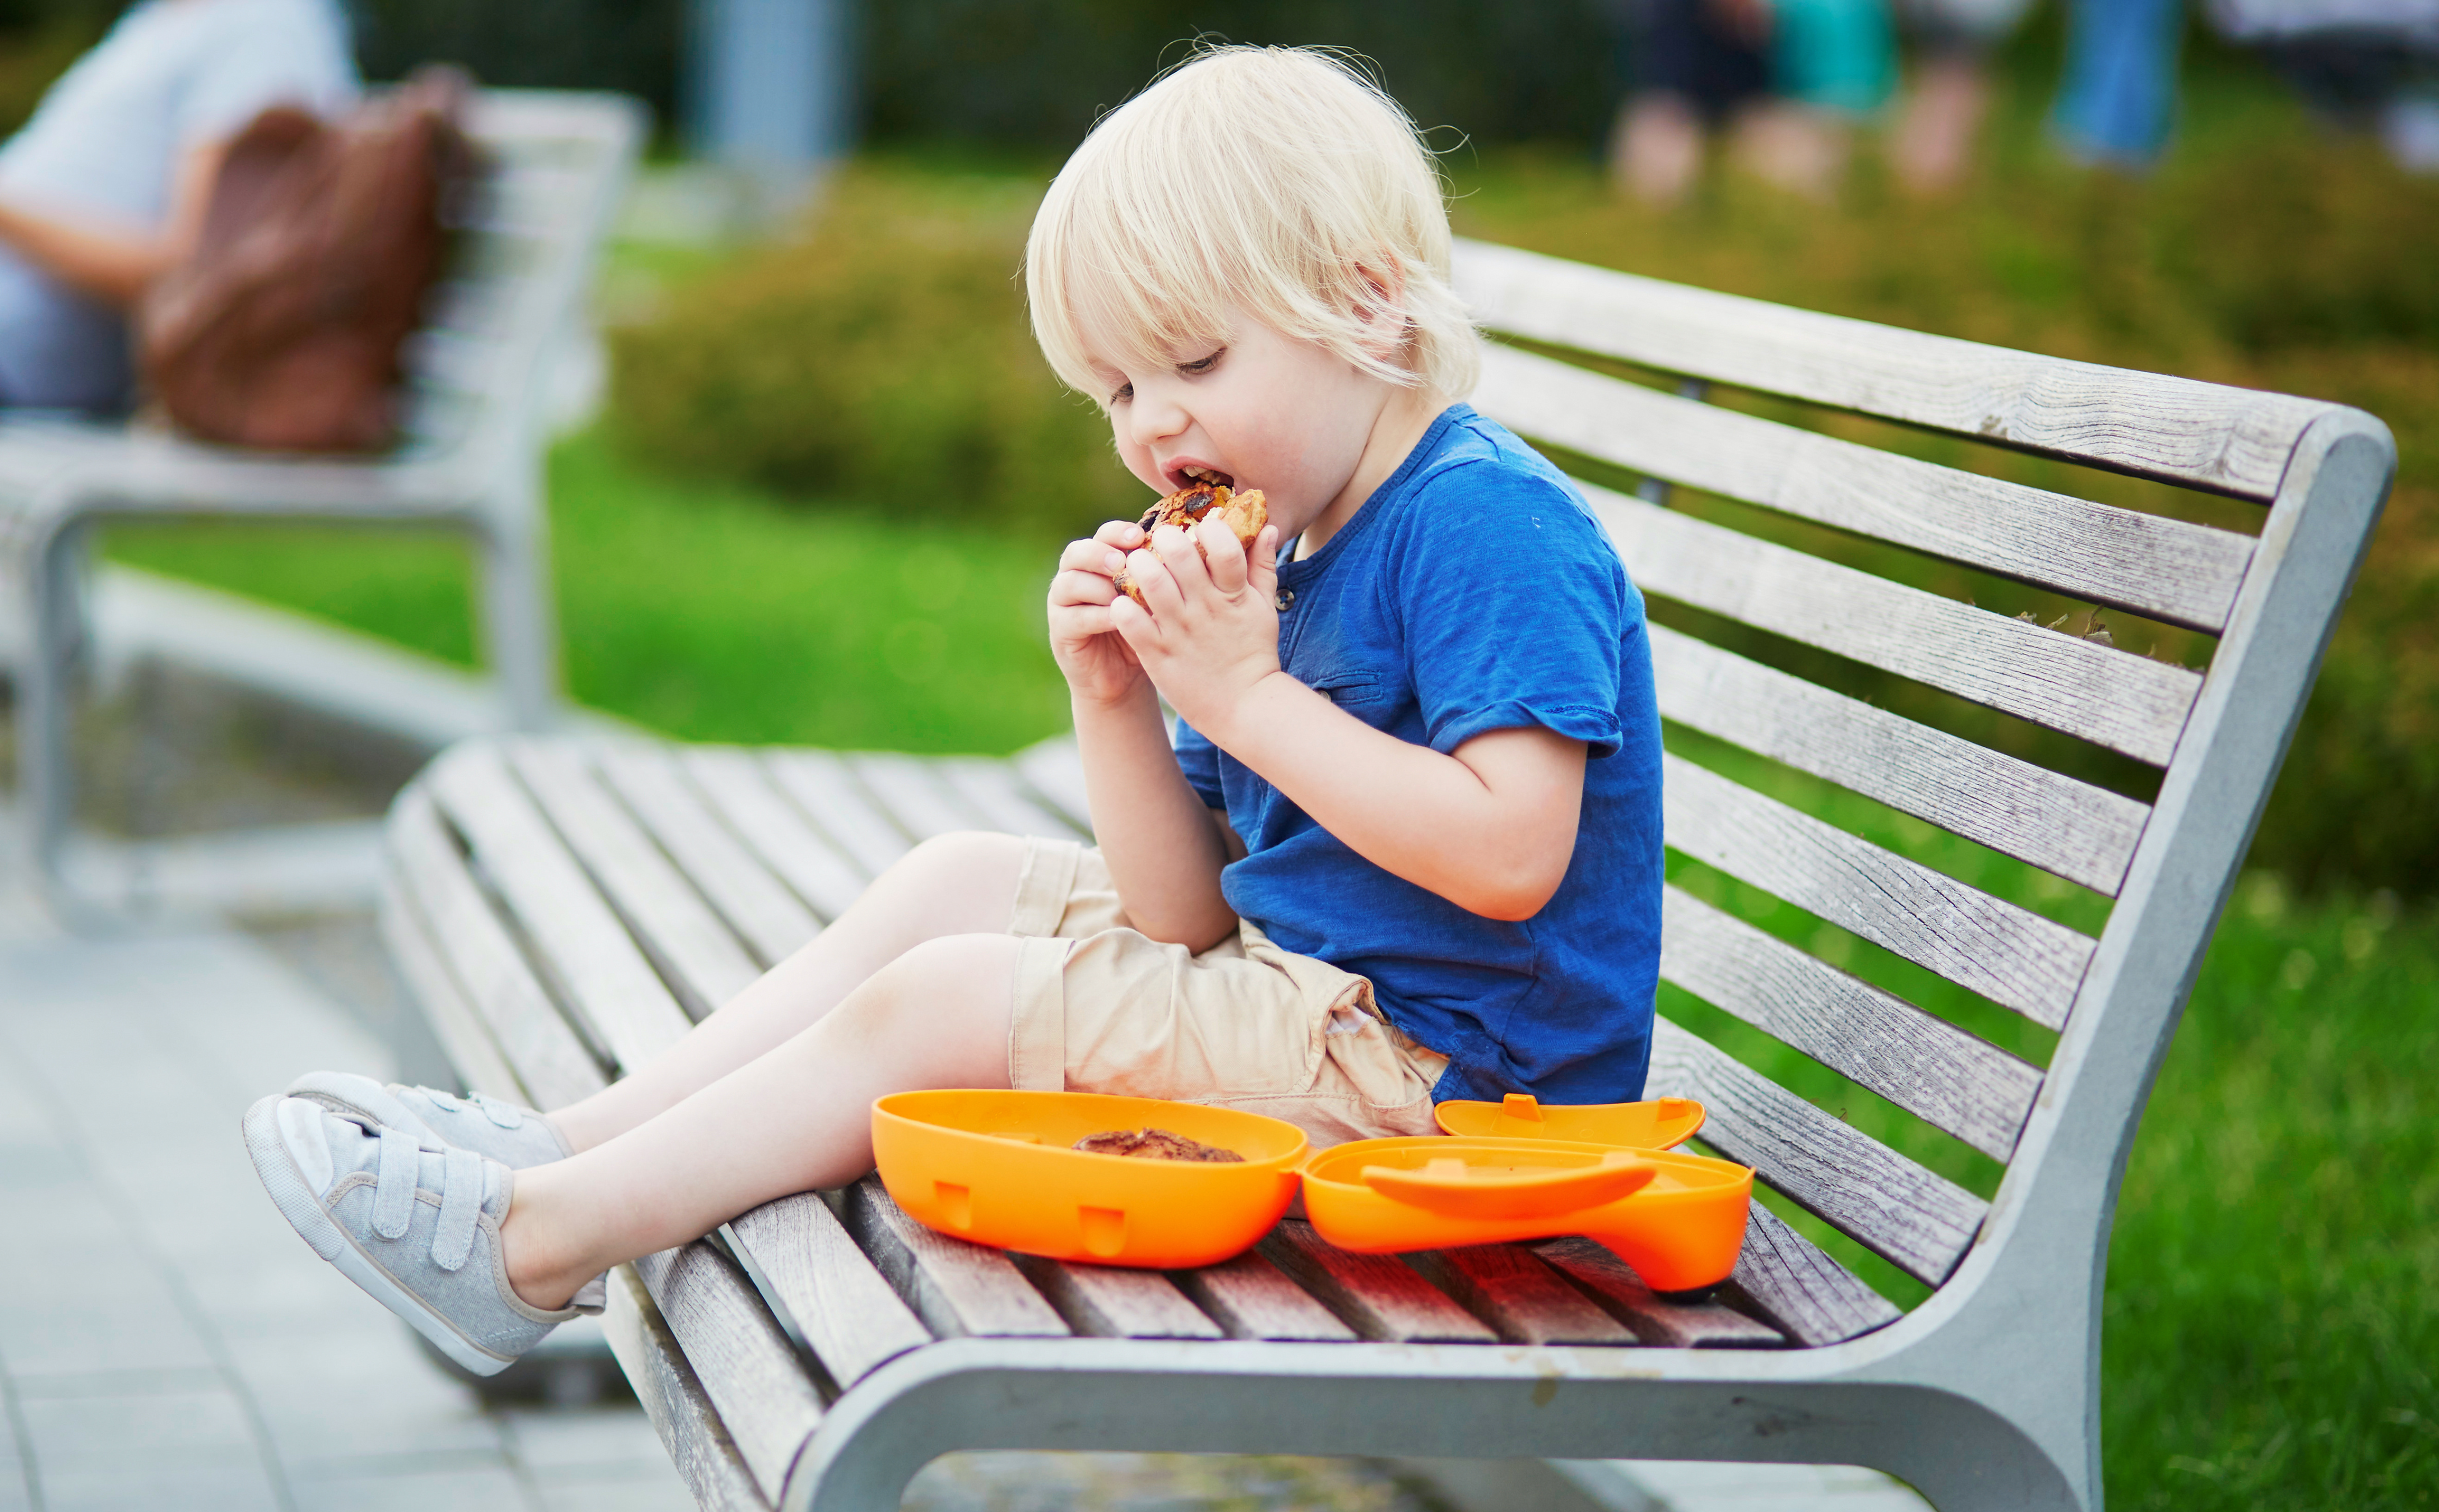 Kid eating snack on a park bench